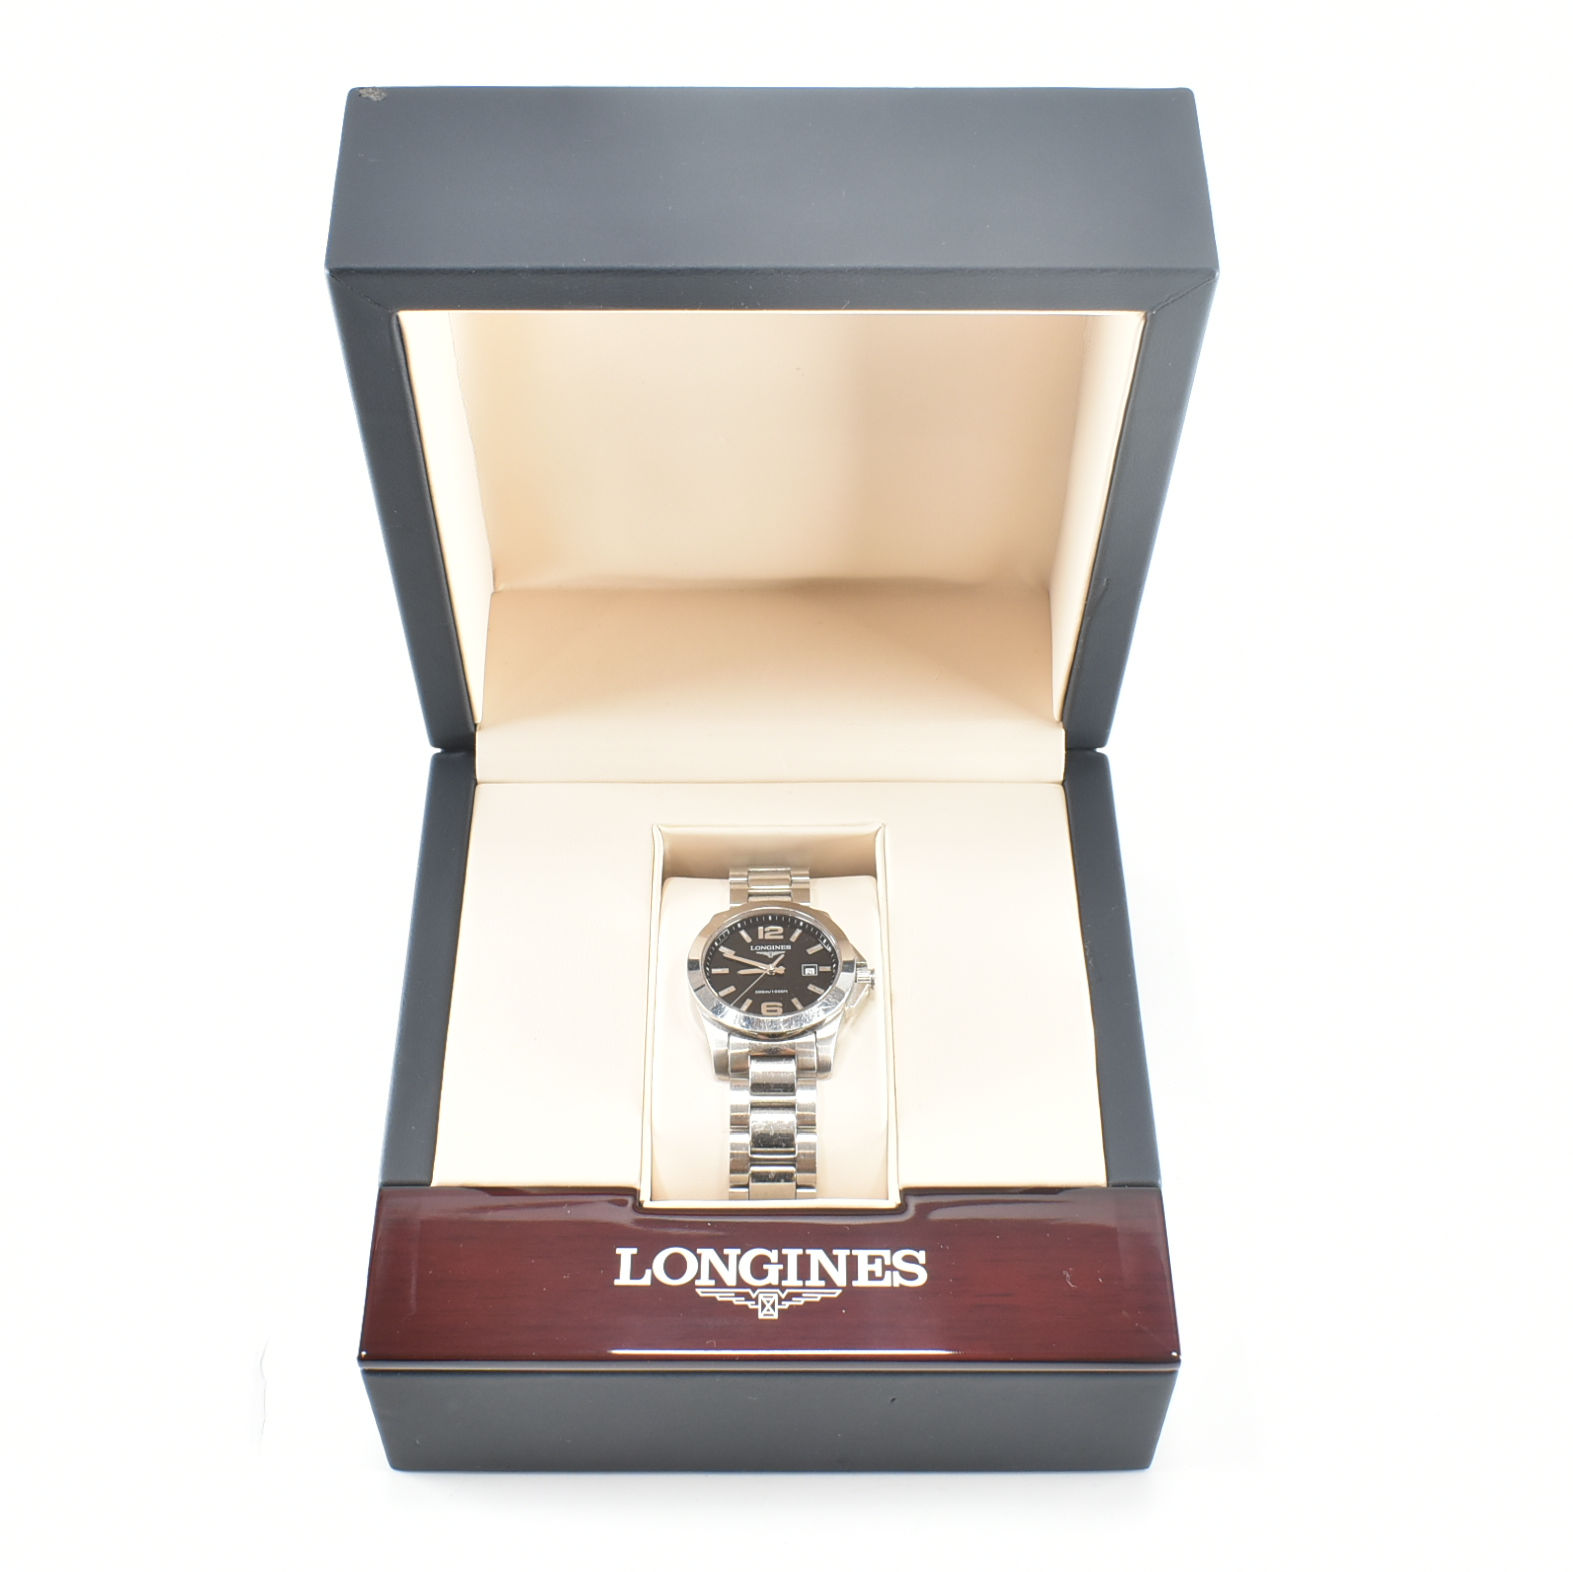 LONGINES CONQUEST STAINLESS STEEL WRISTWATCH - Image 7 of 7